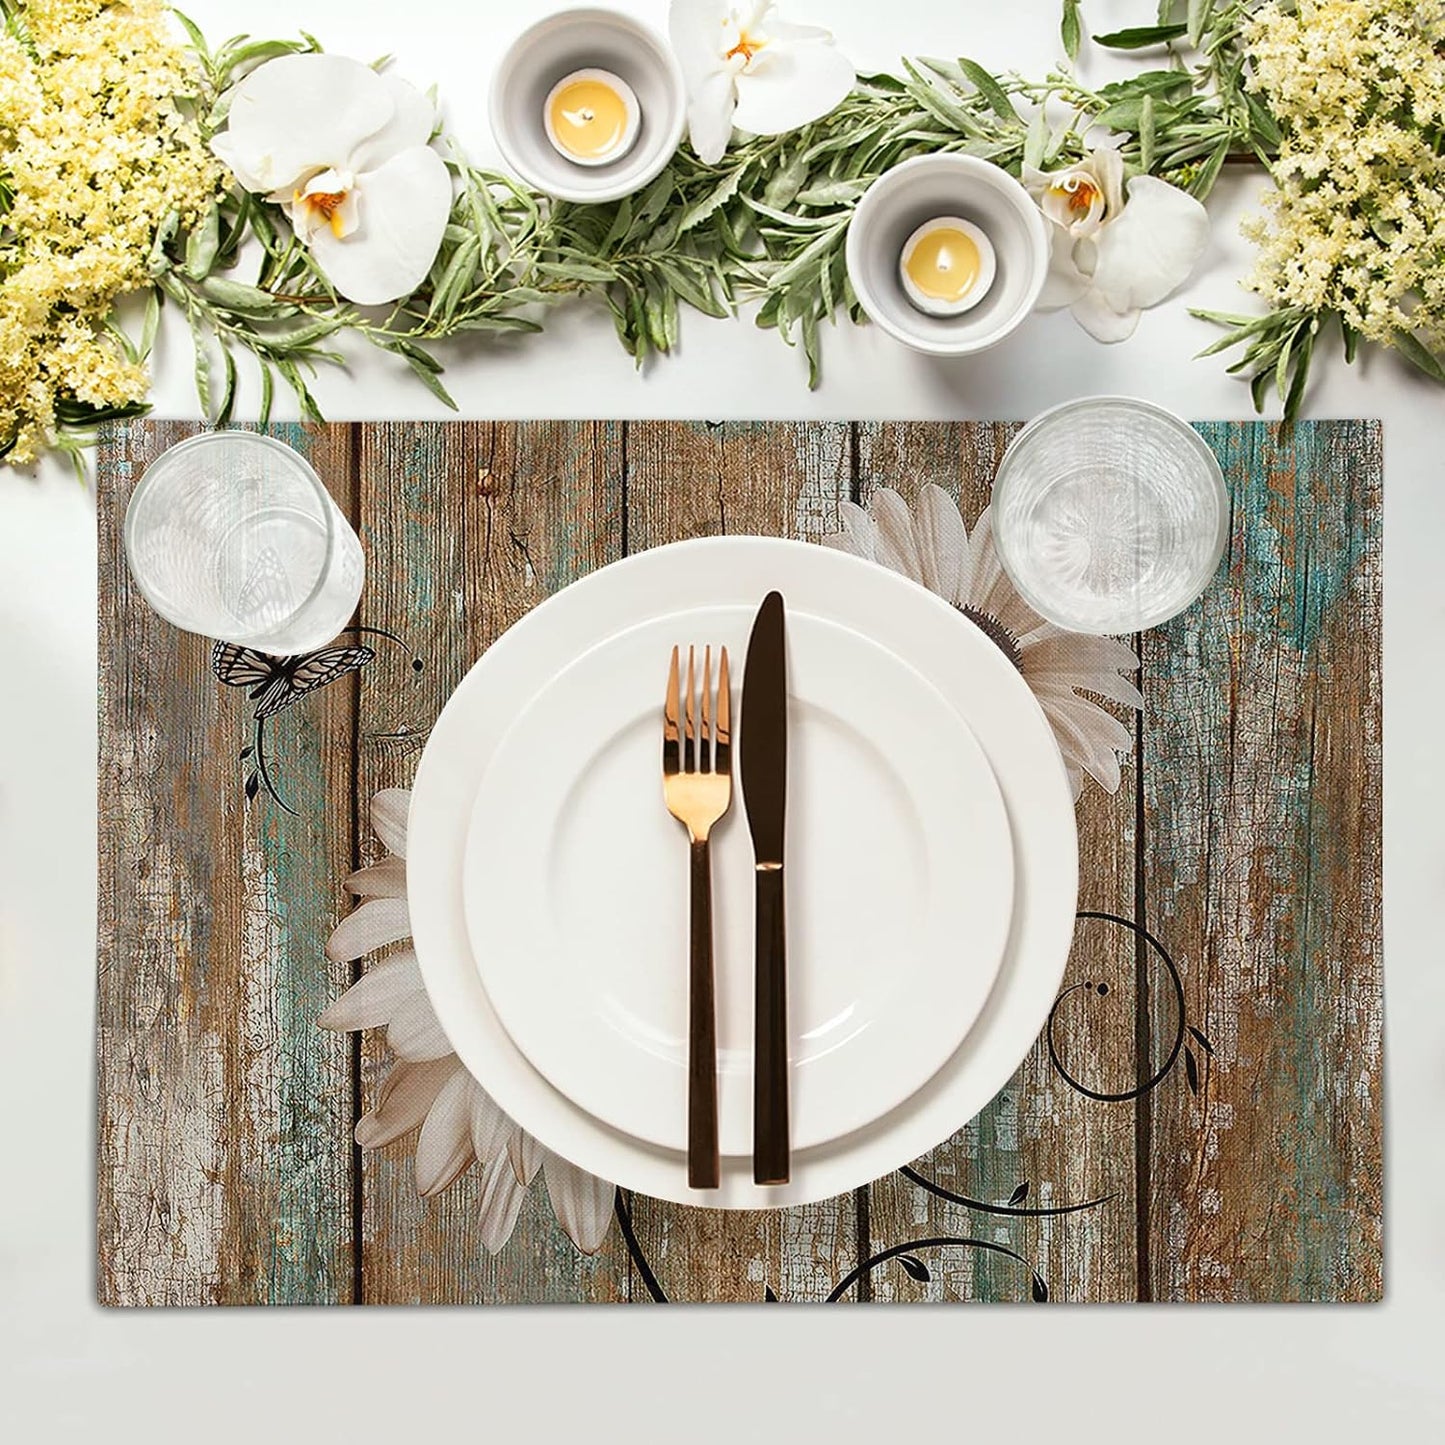 Lvhompro Rustic Daisy Board Placemats- White Sunflowers on Vintage Wood Plank Linen Table Place Mat- Farmhouse Wooden Non-Slip Heat Resistant Table Mats for Dining Kitchen Cabin Lodge Decor